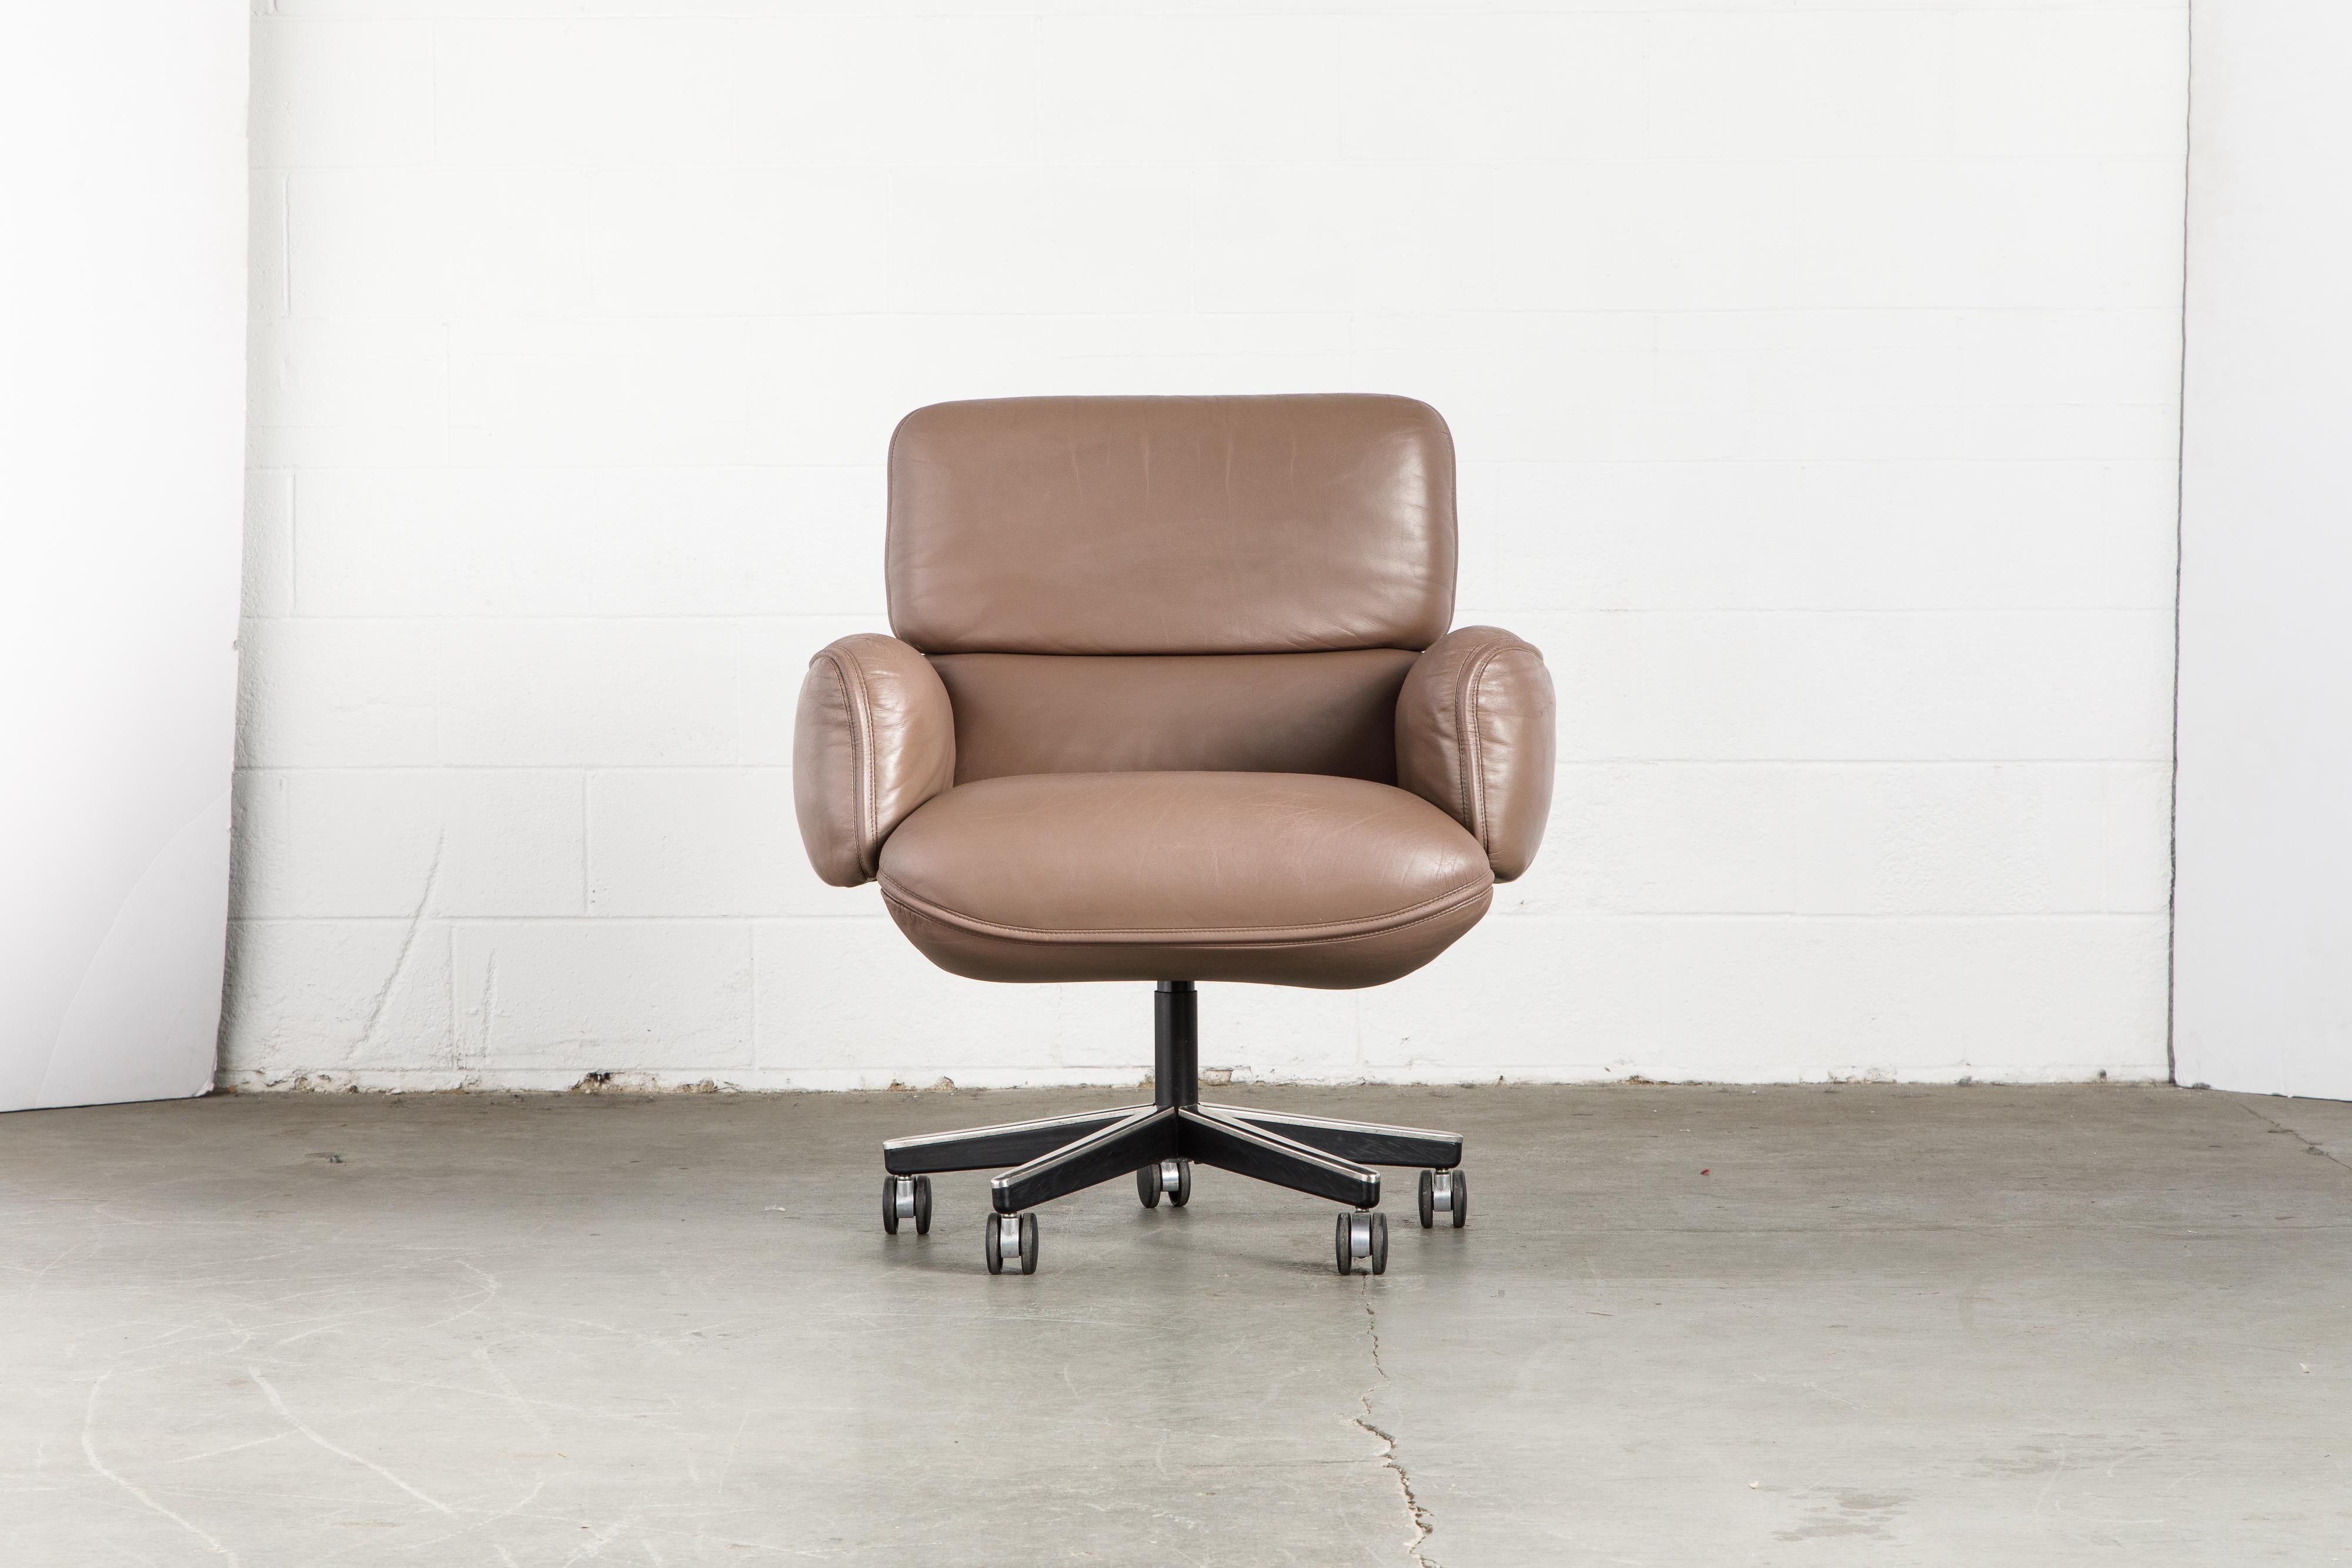 This gorgeous leather executive management desk chair is by Otto Zapf for Knoll International, circa 1985. Constructed of heavily cushioned sections, with the top head section and arms removable. The chair base is height and tilt / recline